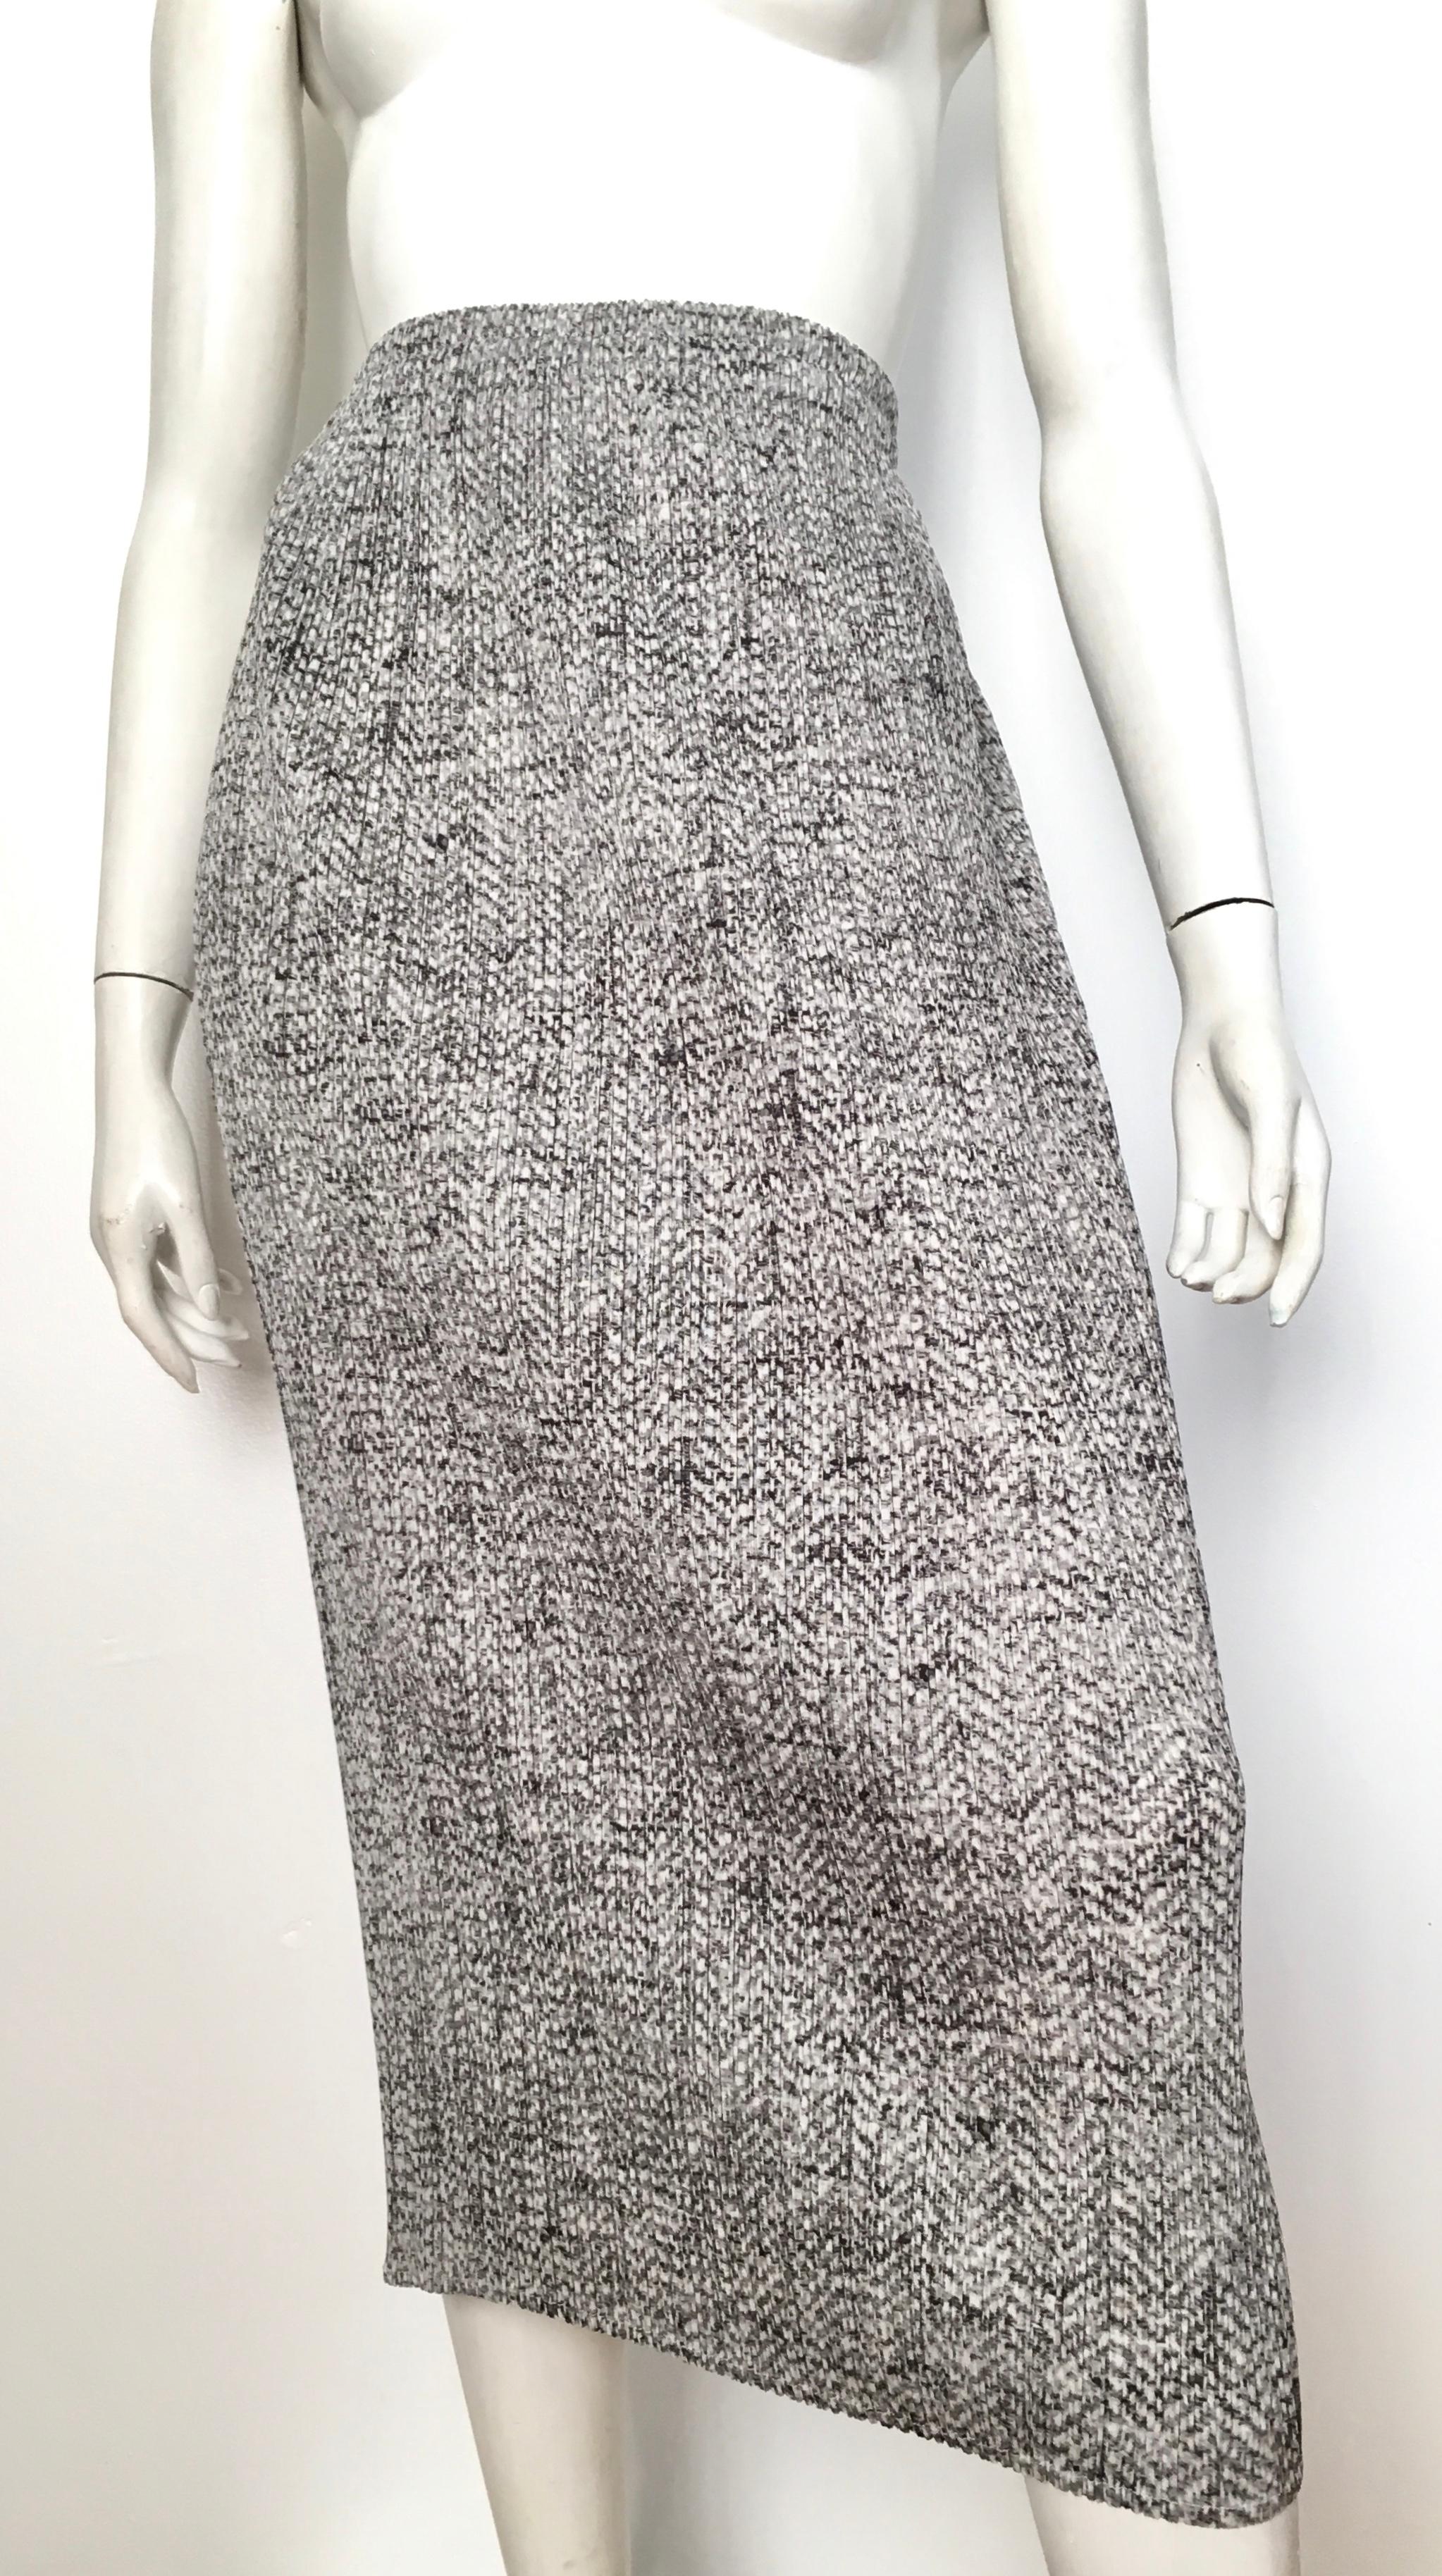 Issey Miyake Pleats Please 1990s Black & White Long Skirt Size Small. 4